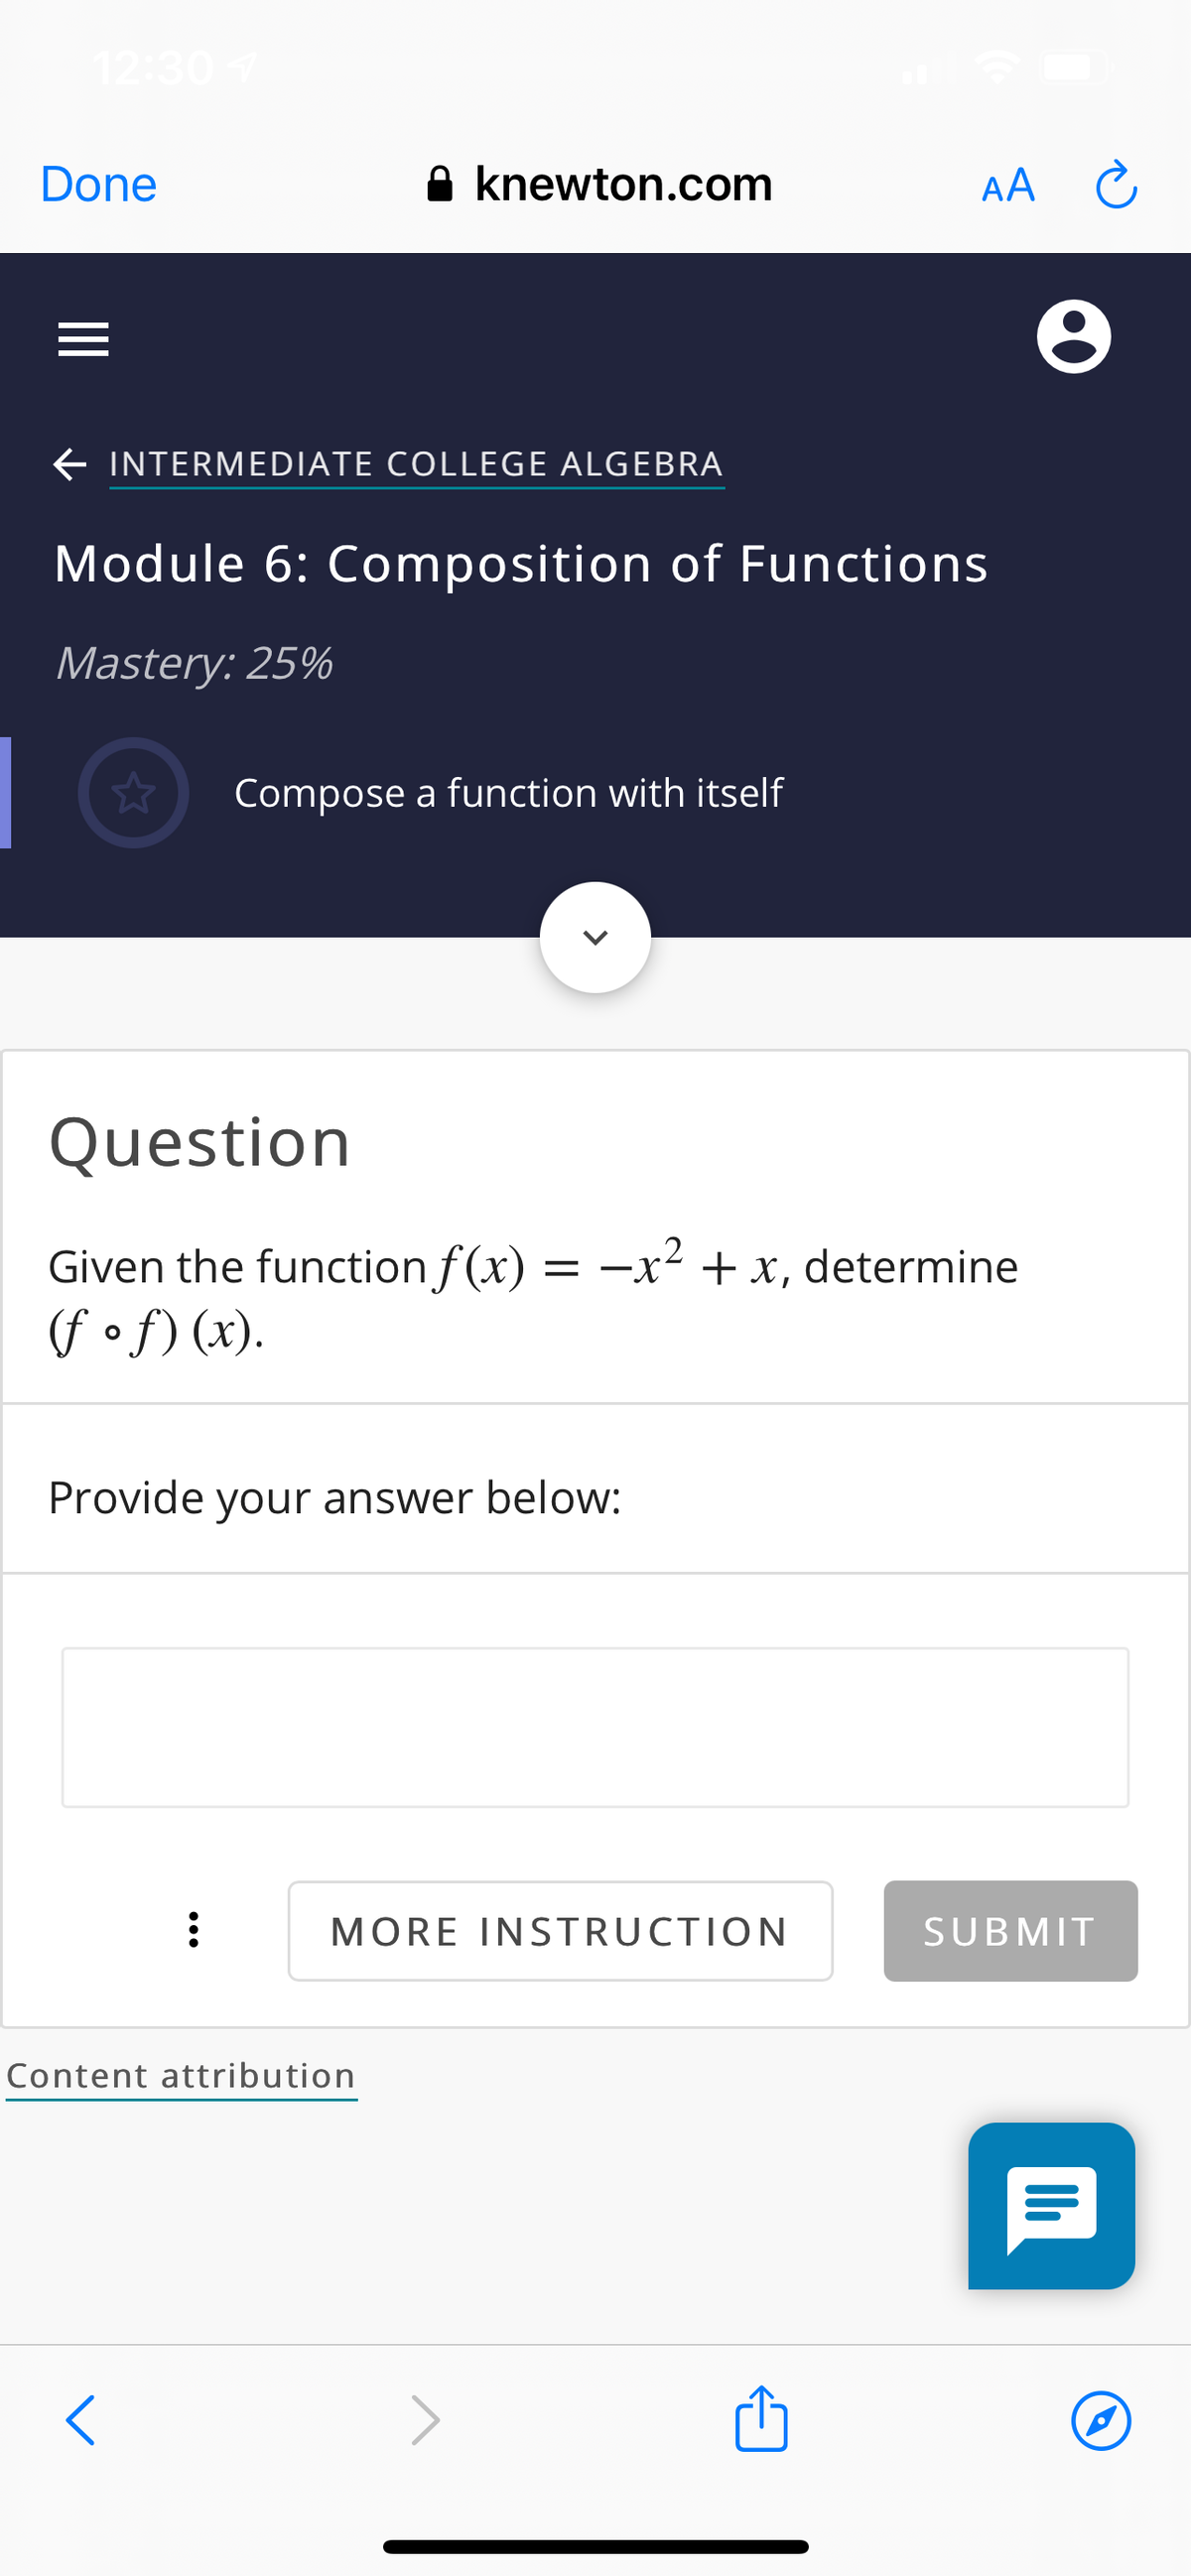 12:30
Done
A knewton.com
AA
E INTERMEDIATE COLLEGE ALGEBRA
Module 6: Composition of Functions
Mastery: 25%
Compose a function with itself
Question
Given the function f (x) = -x² + x, determine
(f of) (x).
Provide your answer below:
MORE INSTRUCTION
SUBMIT
Content attribution
>
